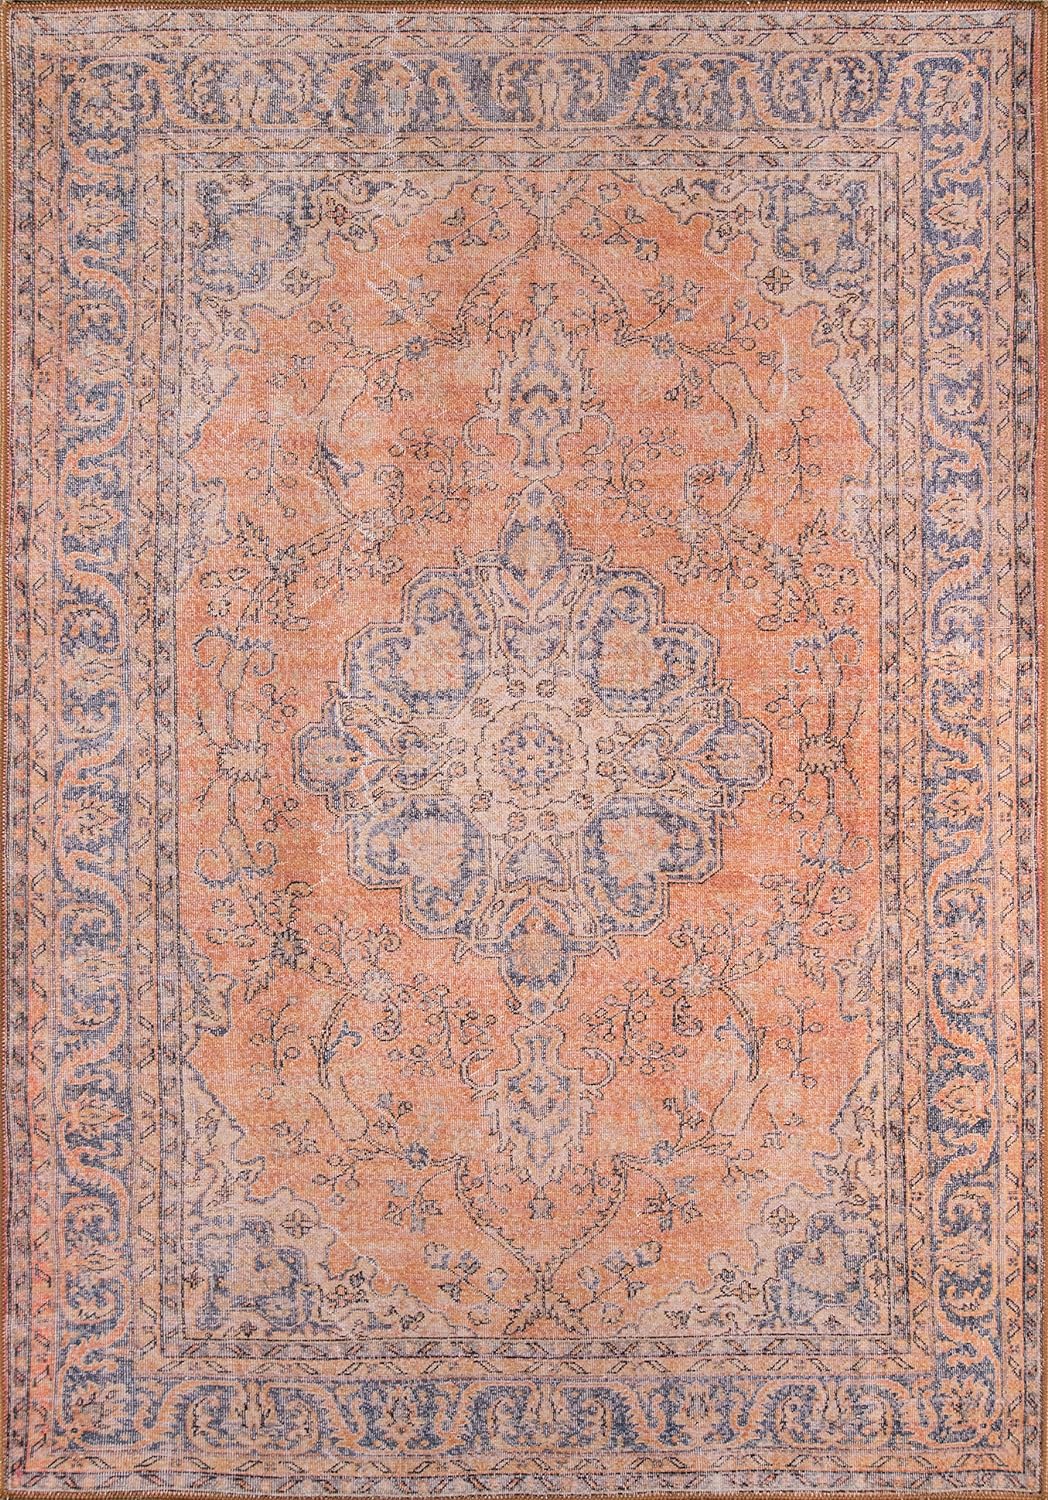 Momeni Afshar Polyester Area Rug, Copper, 10' X 14' (AFS11)